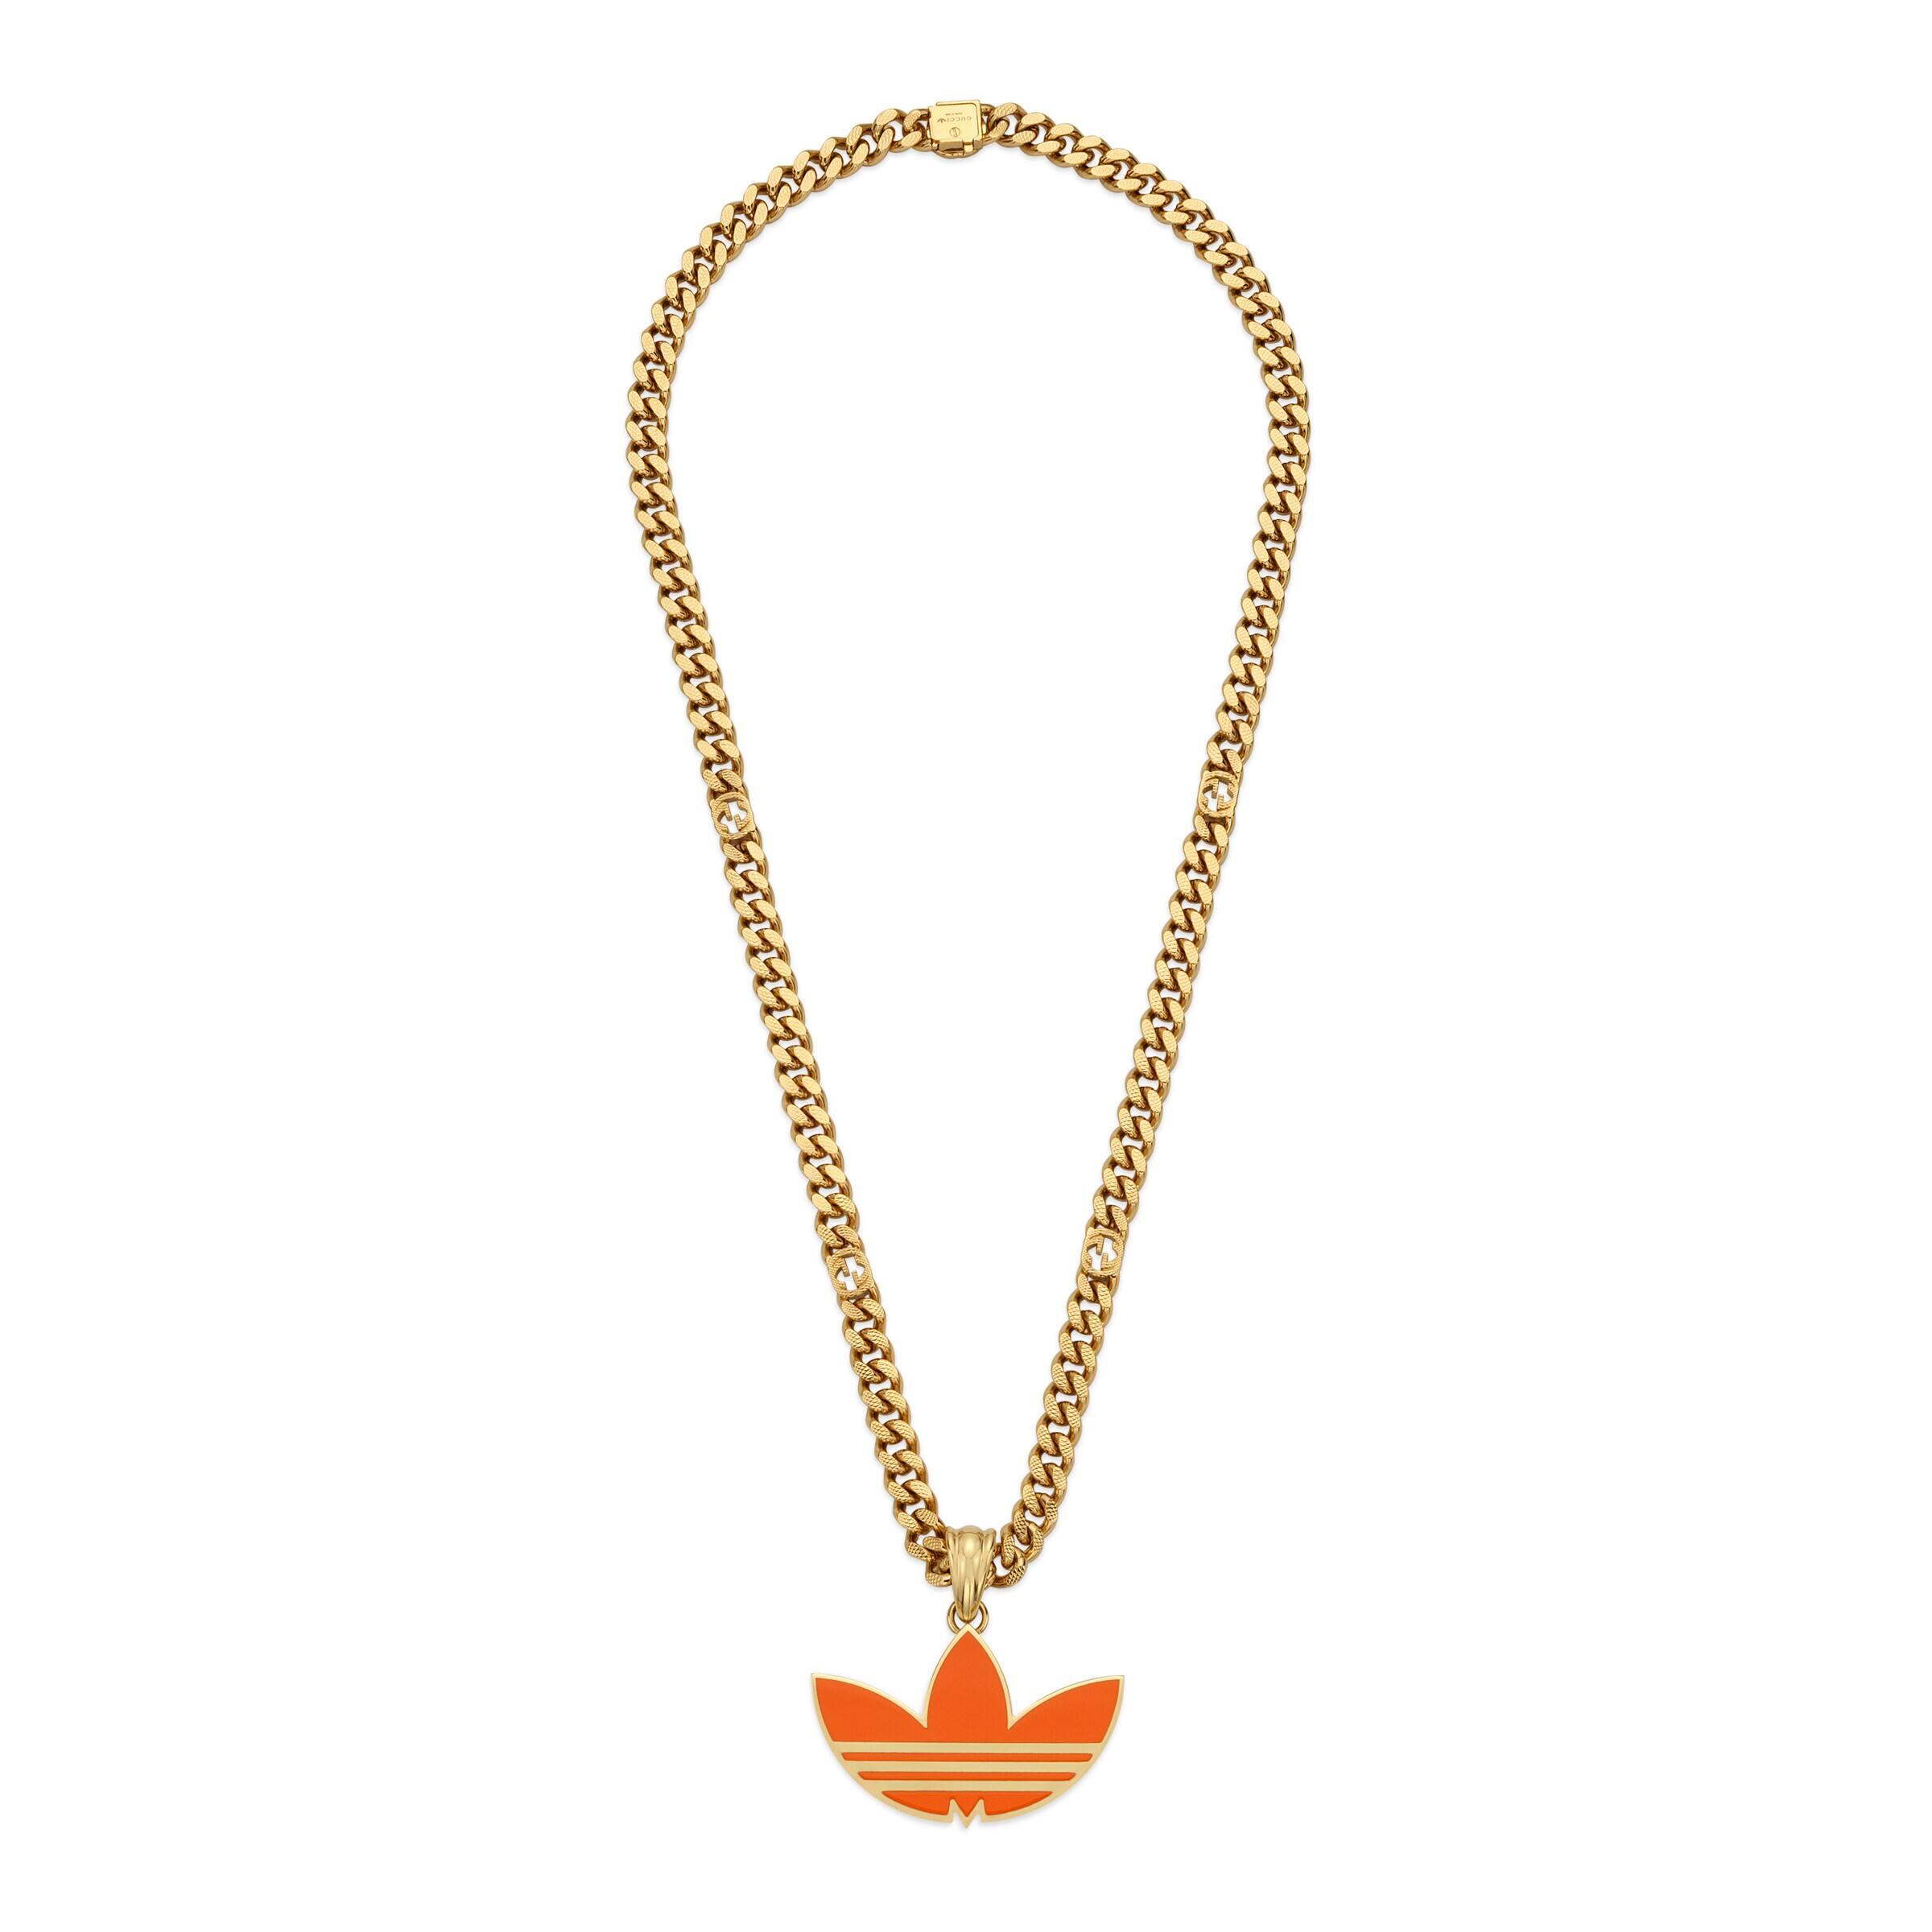 Gucci Adidas X Gourmette Necklace With Enamel Trefoil Pendant in Metallic |  Lyst